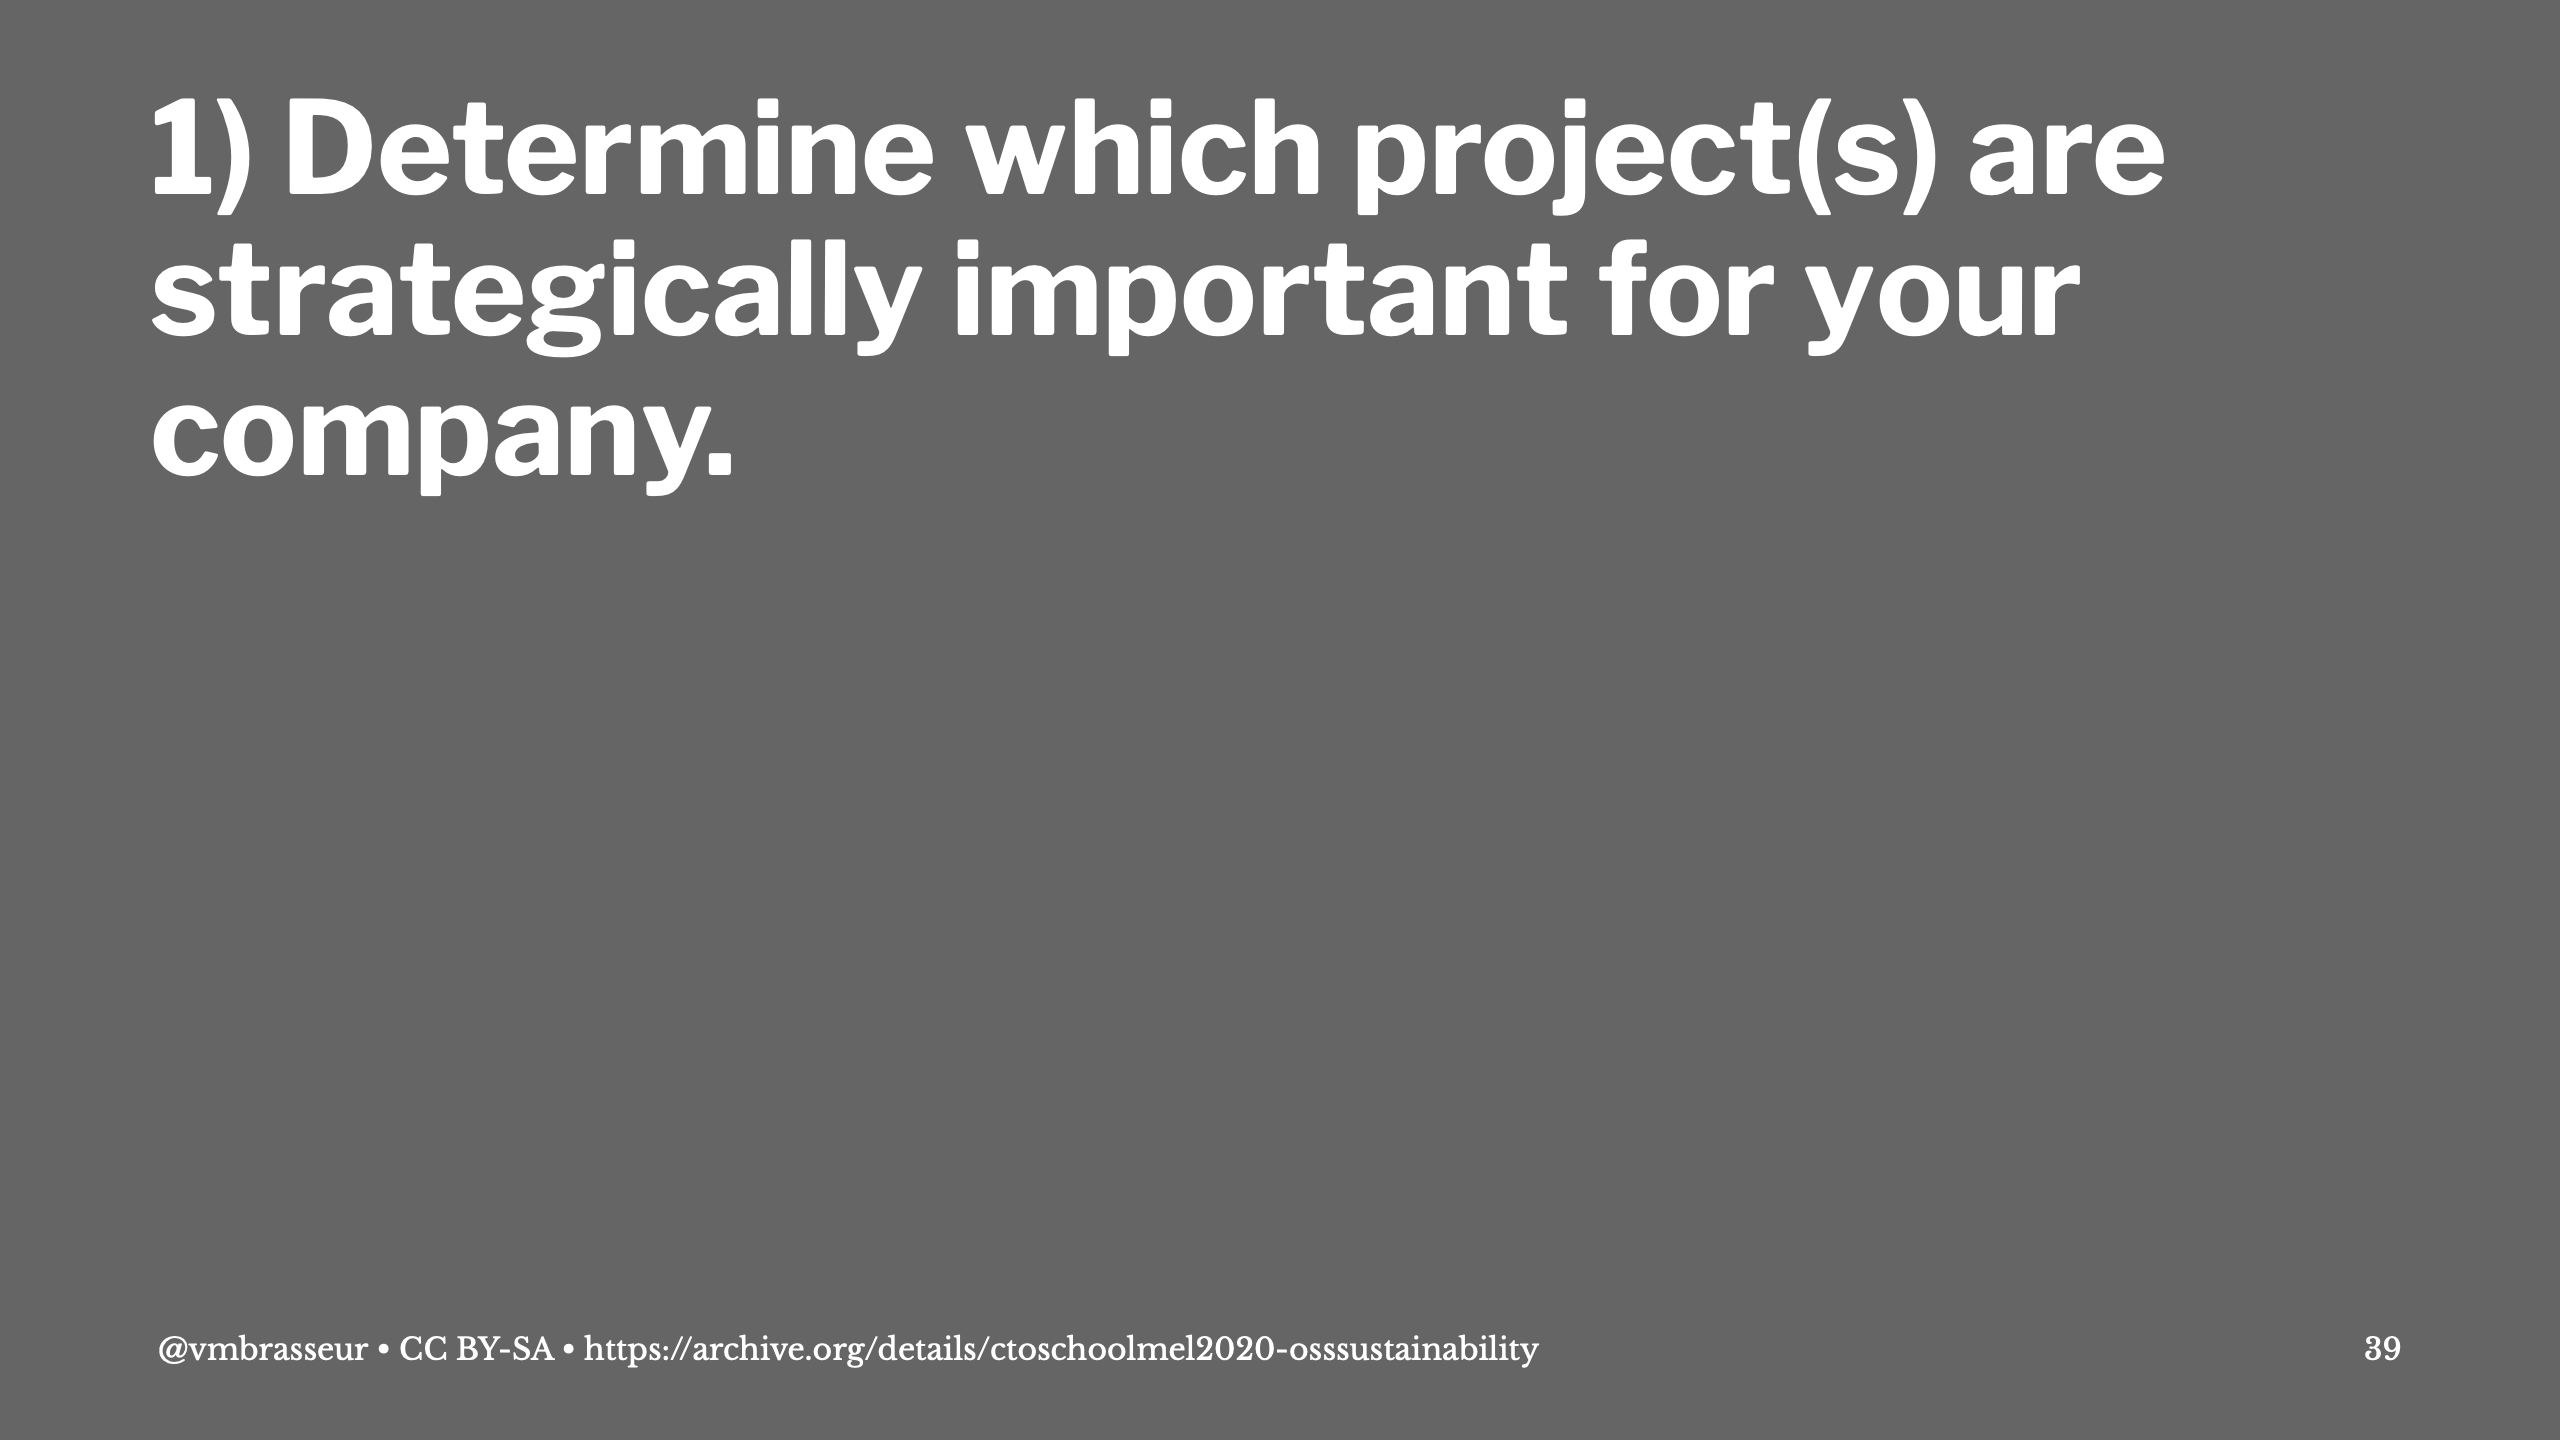 1) Determine which project(s) are strategically important for your company.